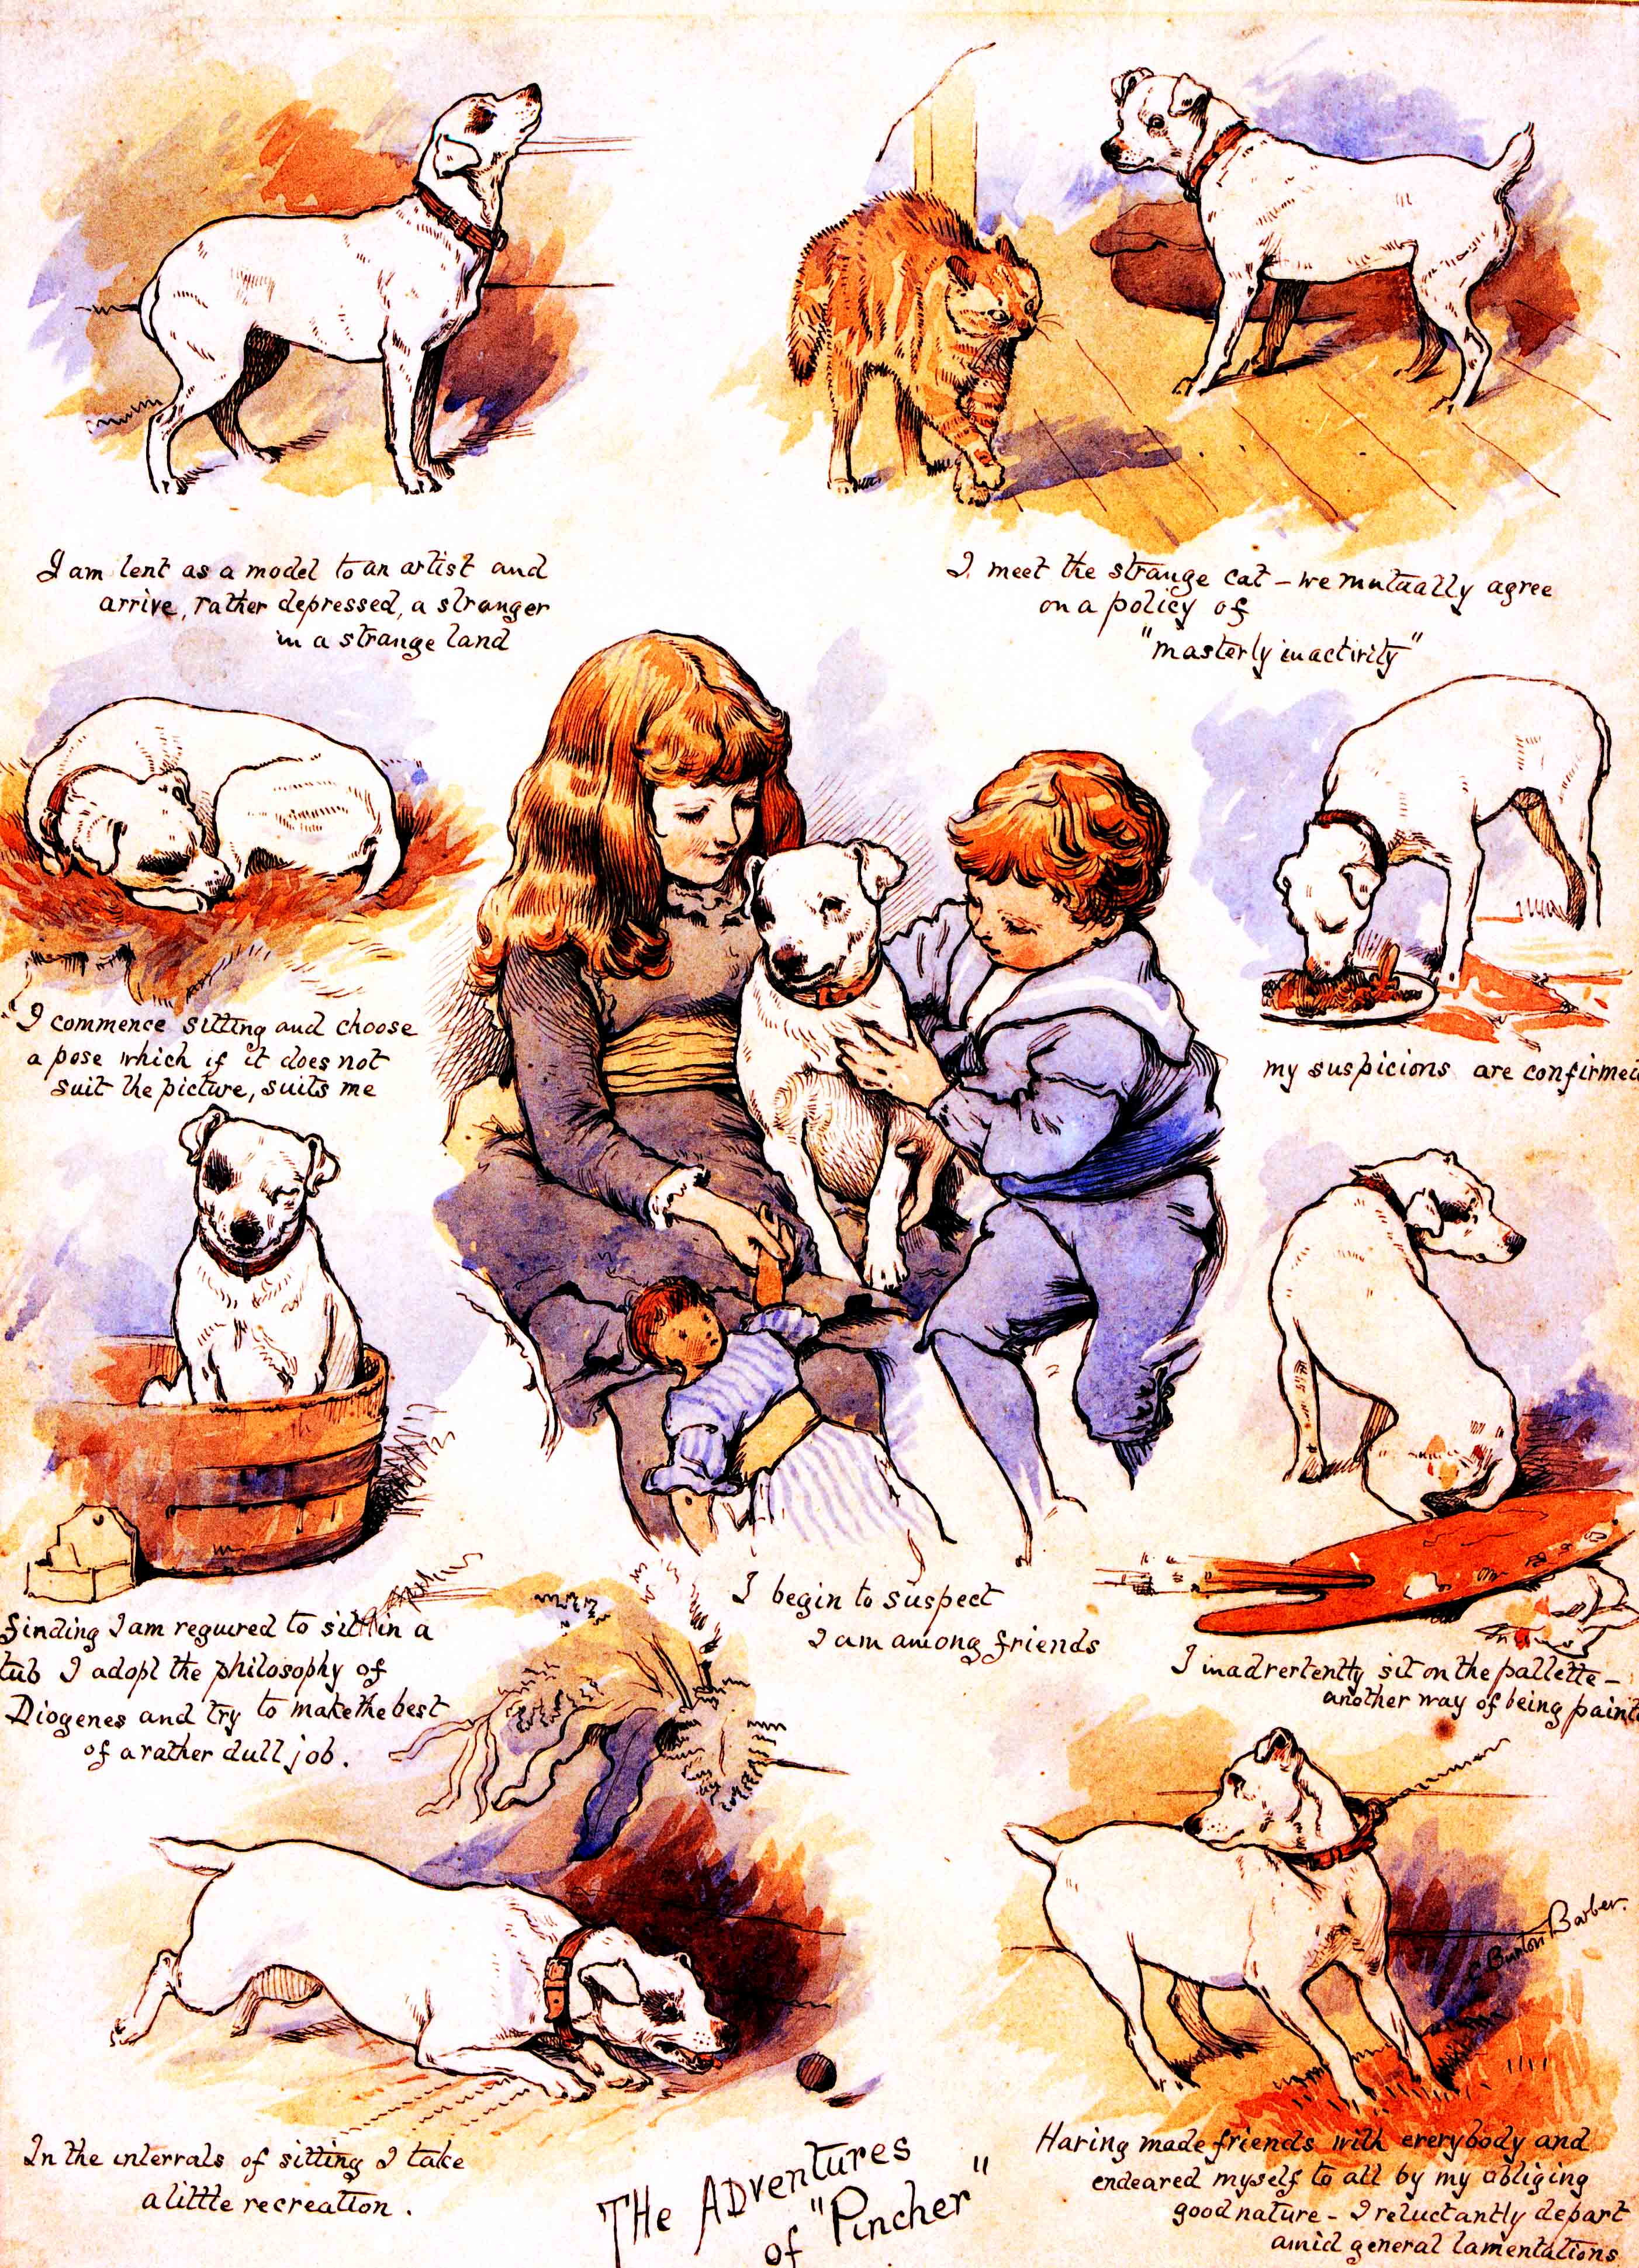 Click to see full size: ?Adventures of Pincher?-   Charles Burton Barber, ROI, English, (1845 ? 1894), the ?Adventures of Pincher? watercolour, pen and ink on paper, circa 1890.
  
  The ?Adventures of Pincher? was an illustrated children?s book inspired by the artist?s daily visits for more than 20 years, to the Queen Victoria?s homes ?s painting her dogs and grand children.
